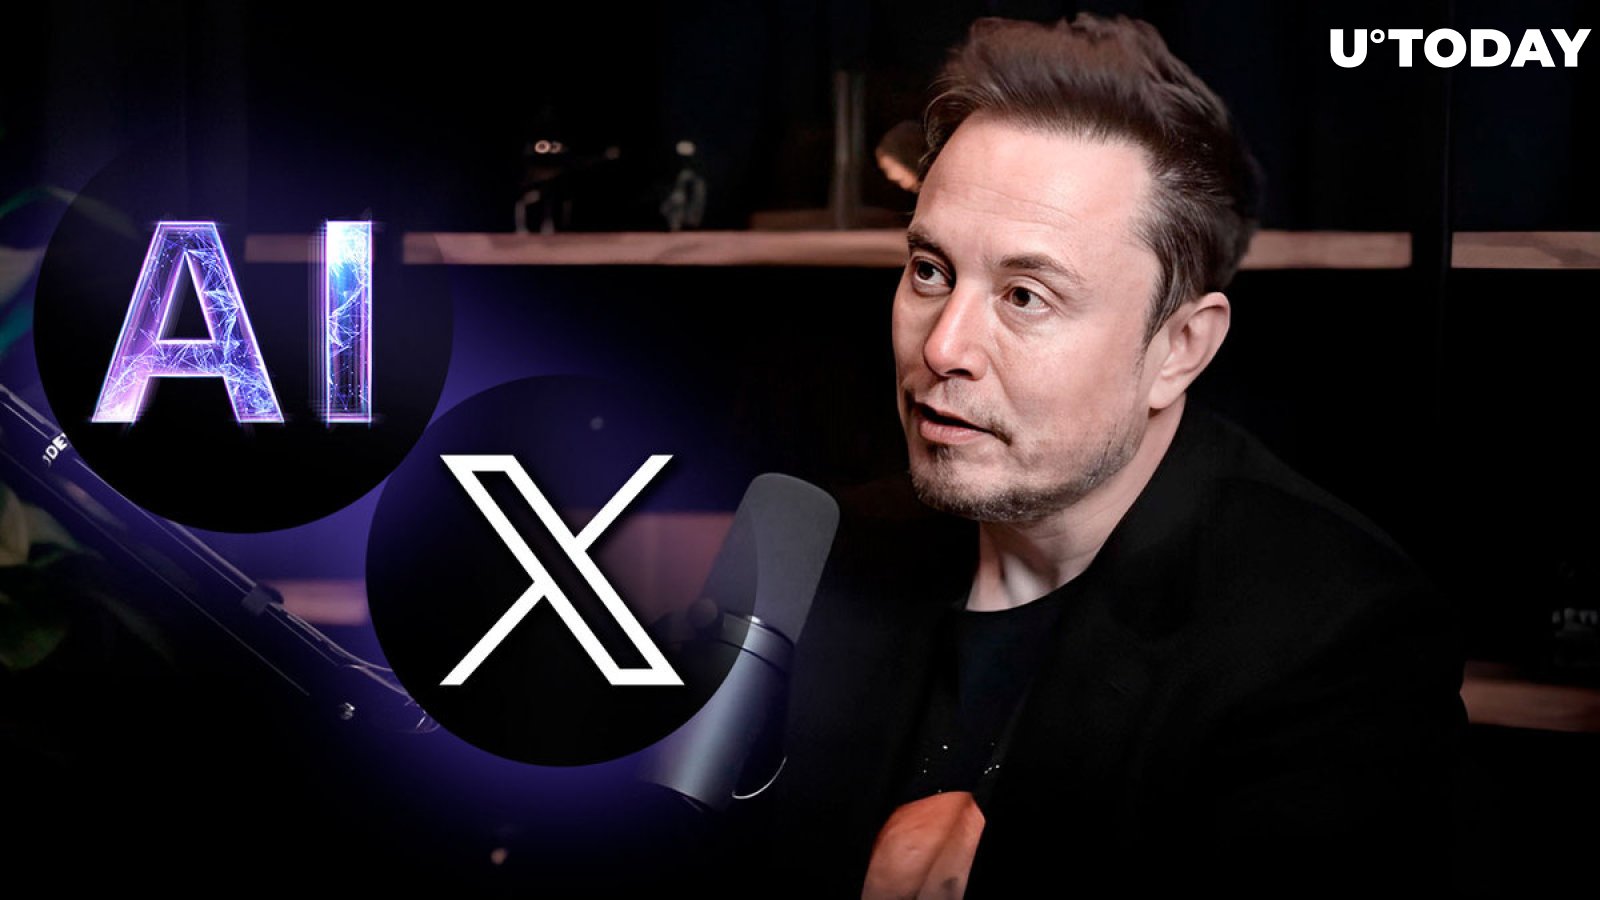  Elon Musk’s Controversial AI Statement Raises Hot Discussion in Community